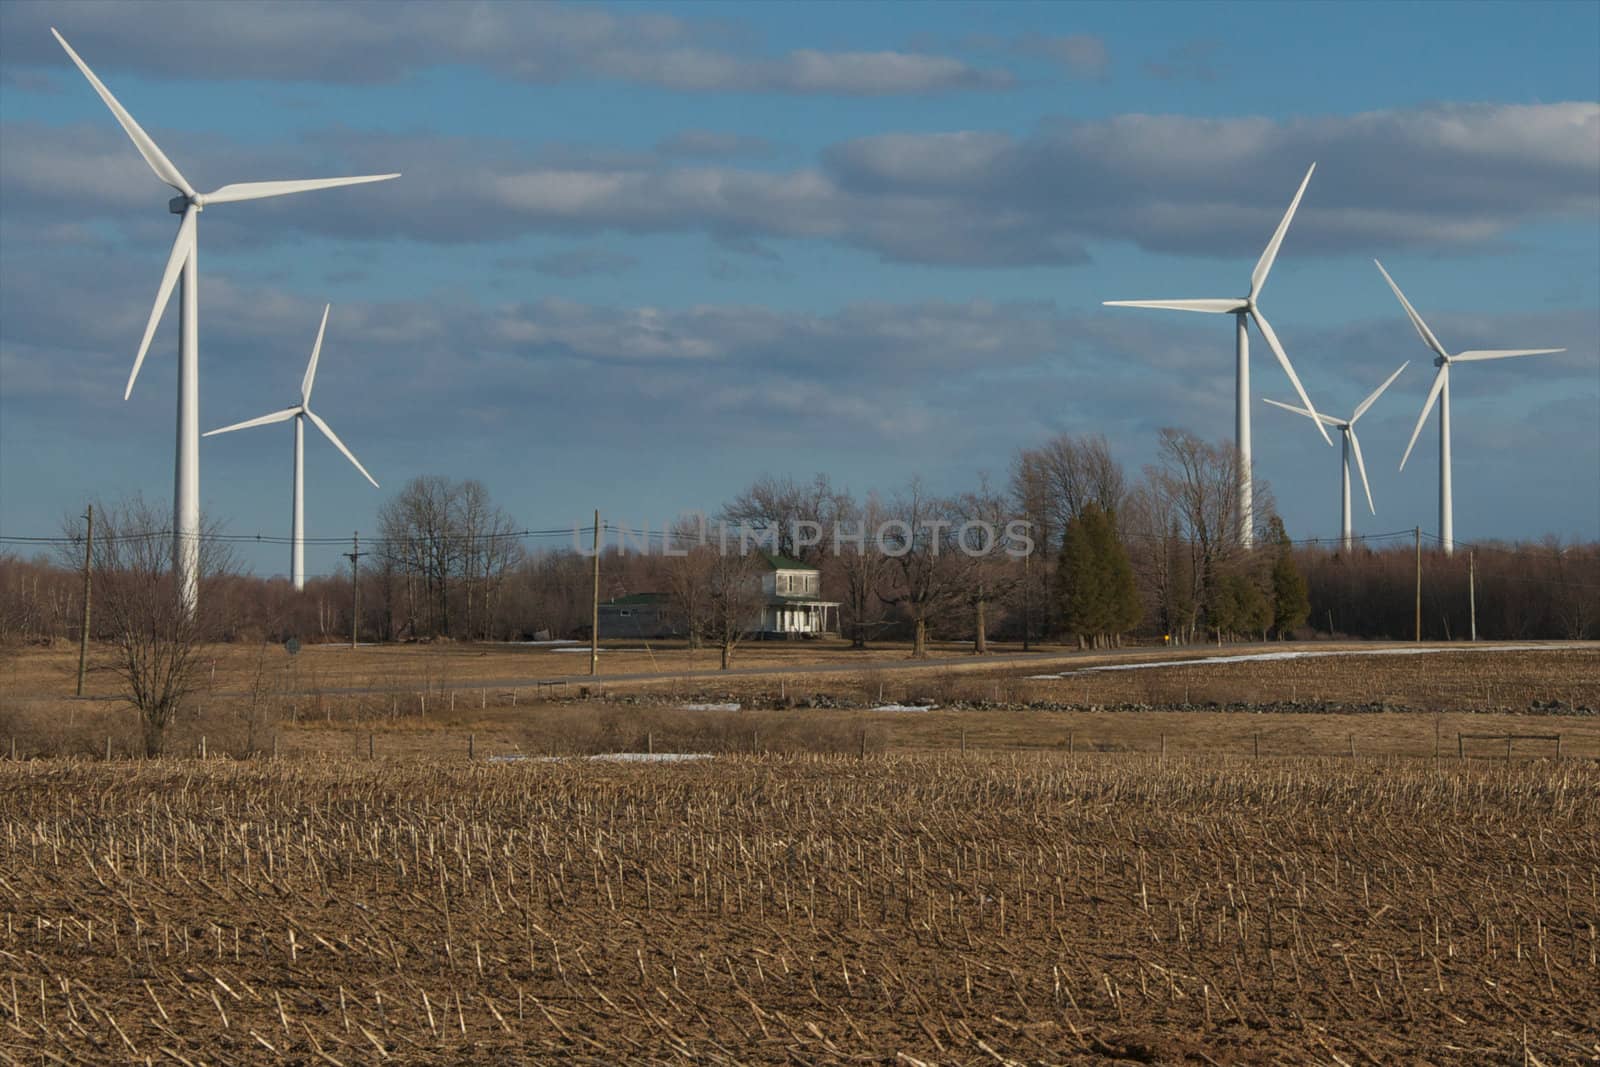 These windmills are located near the St. Lawrence Seaway in upstate New York.